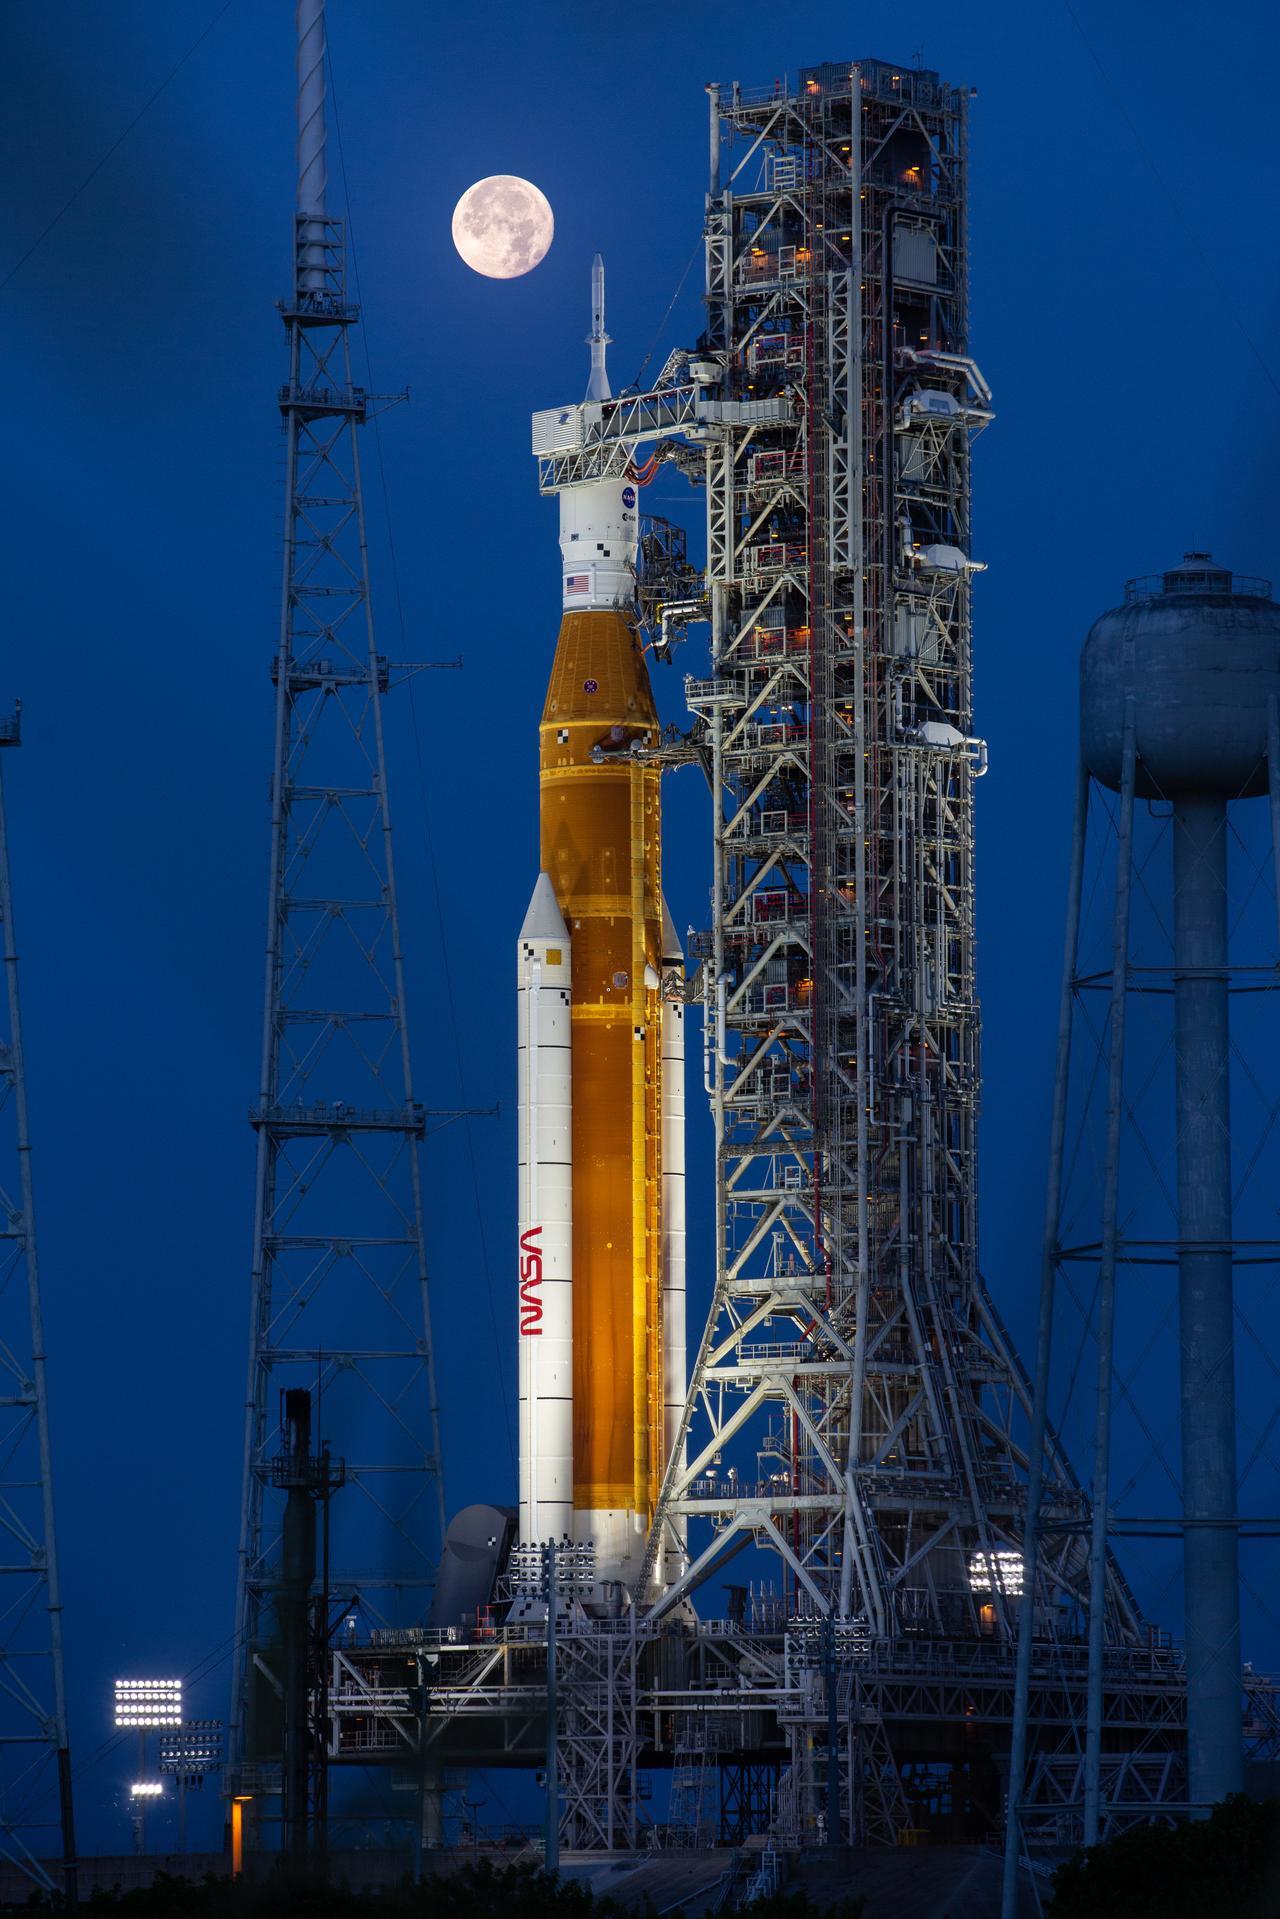 Full Moon over Artemis-1 on July 14, 2022, as the integrated Space Launch System and Orion spacecraft await testing.